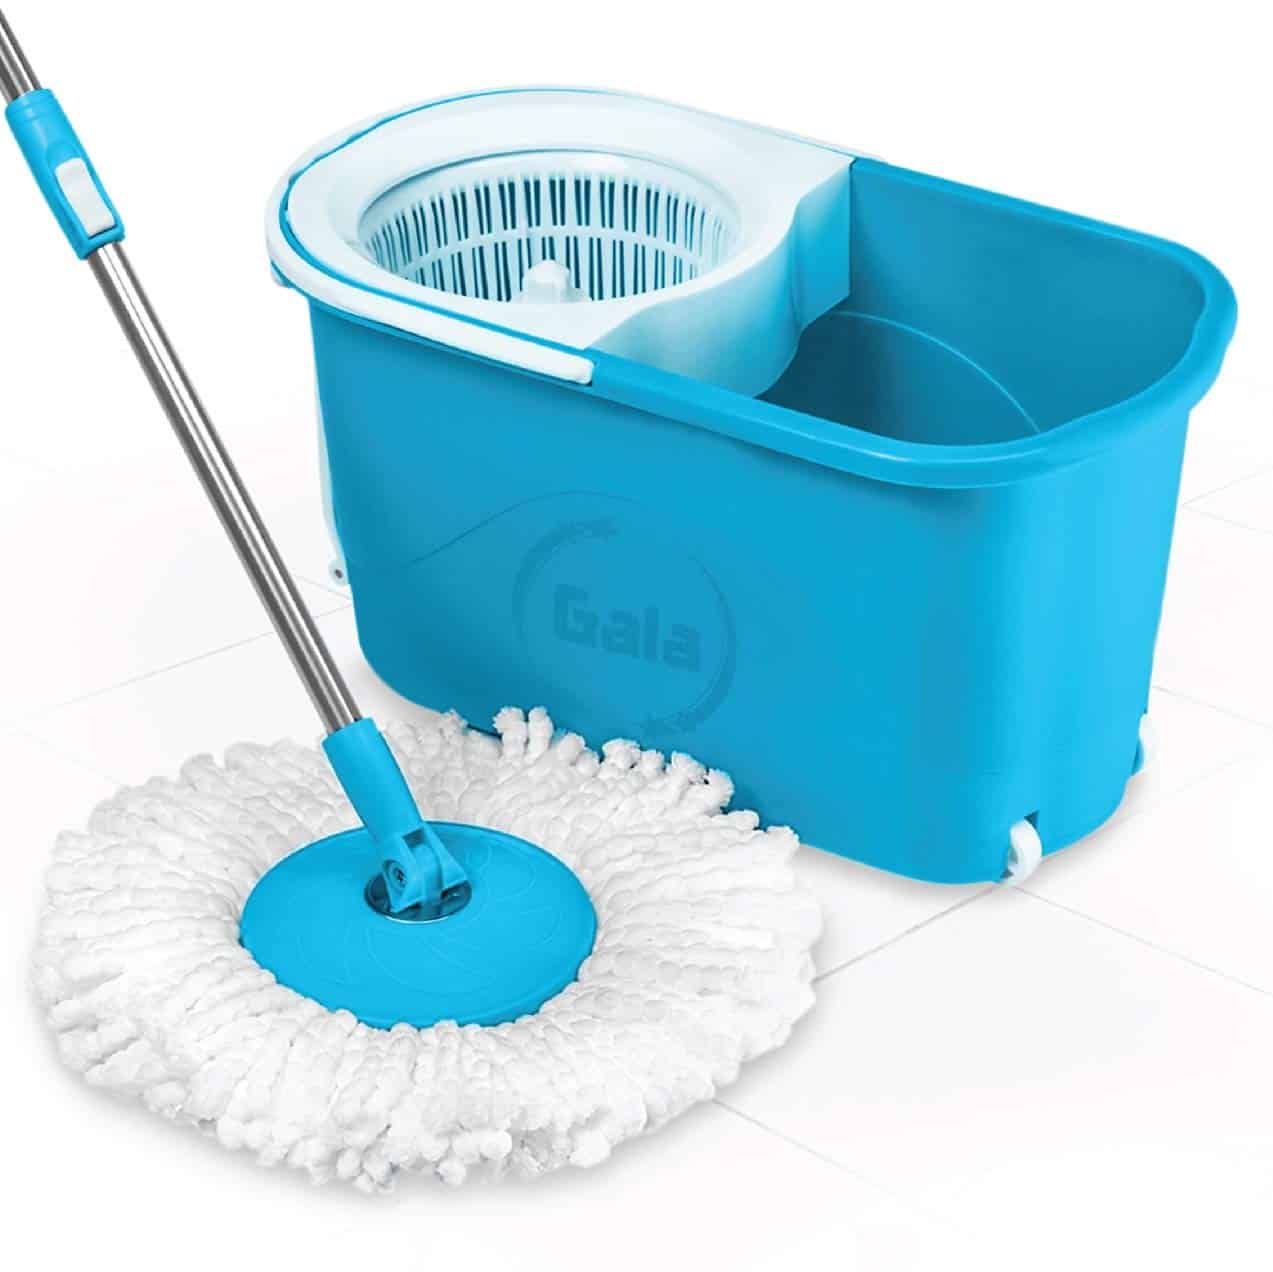 Best Gala Spin Mop in India 2021 (Very Useful Product for Deep Cleaning) UP to 40% OFF on Amazon 1